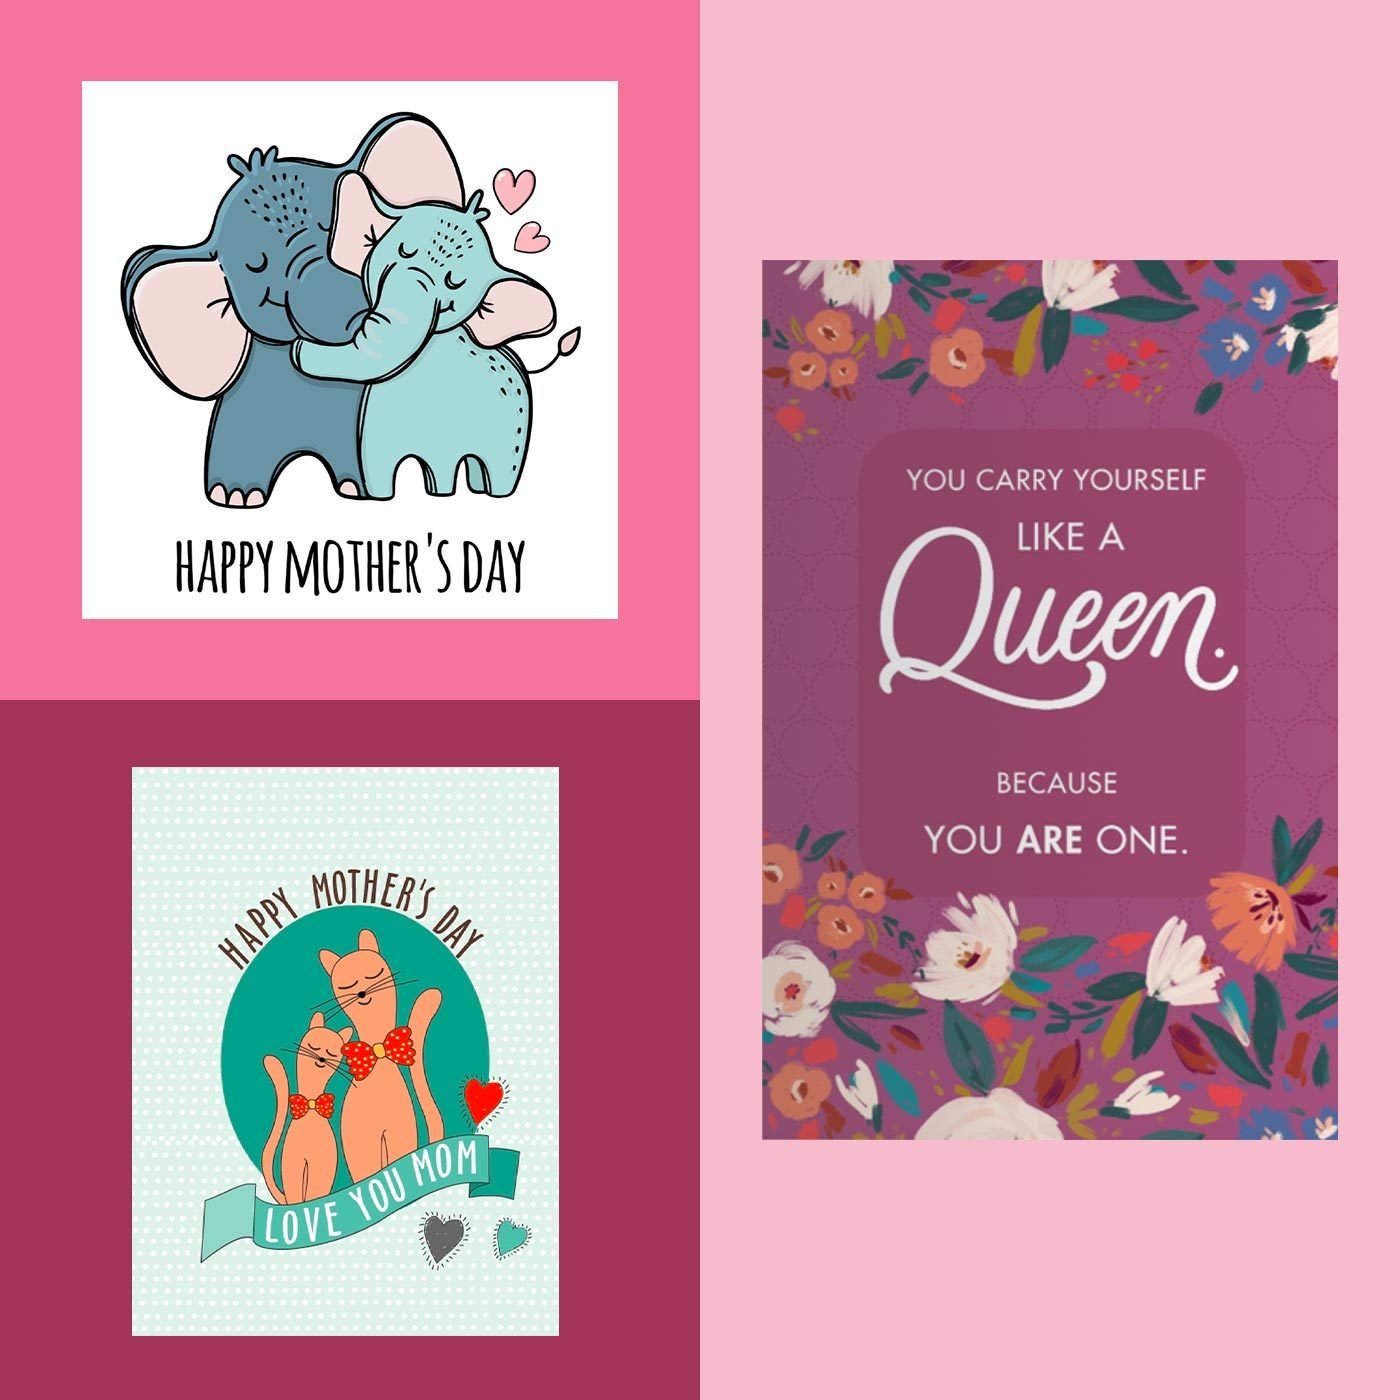 Happy Mother's Day 2021: Wishes, Images, Quotes, Status, Messages, Photos  Download